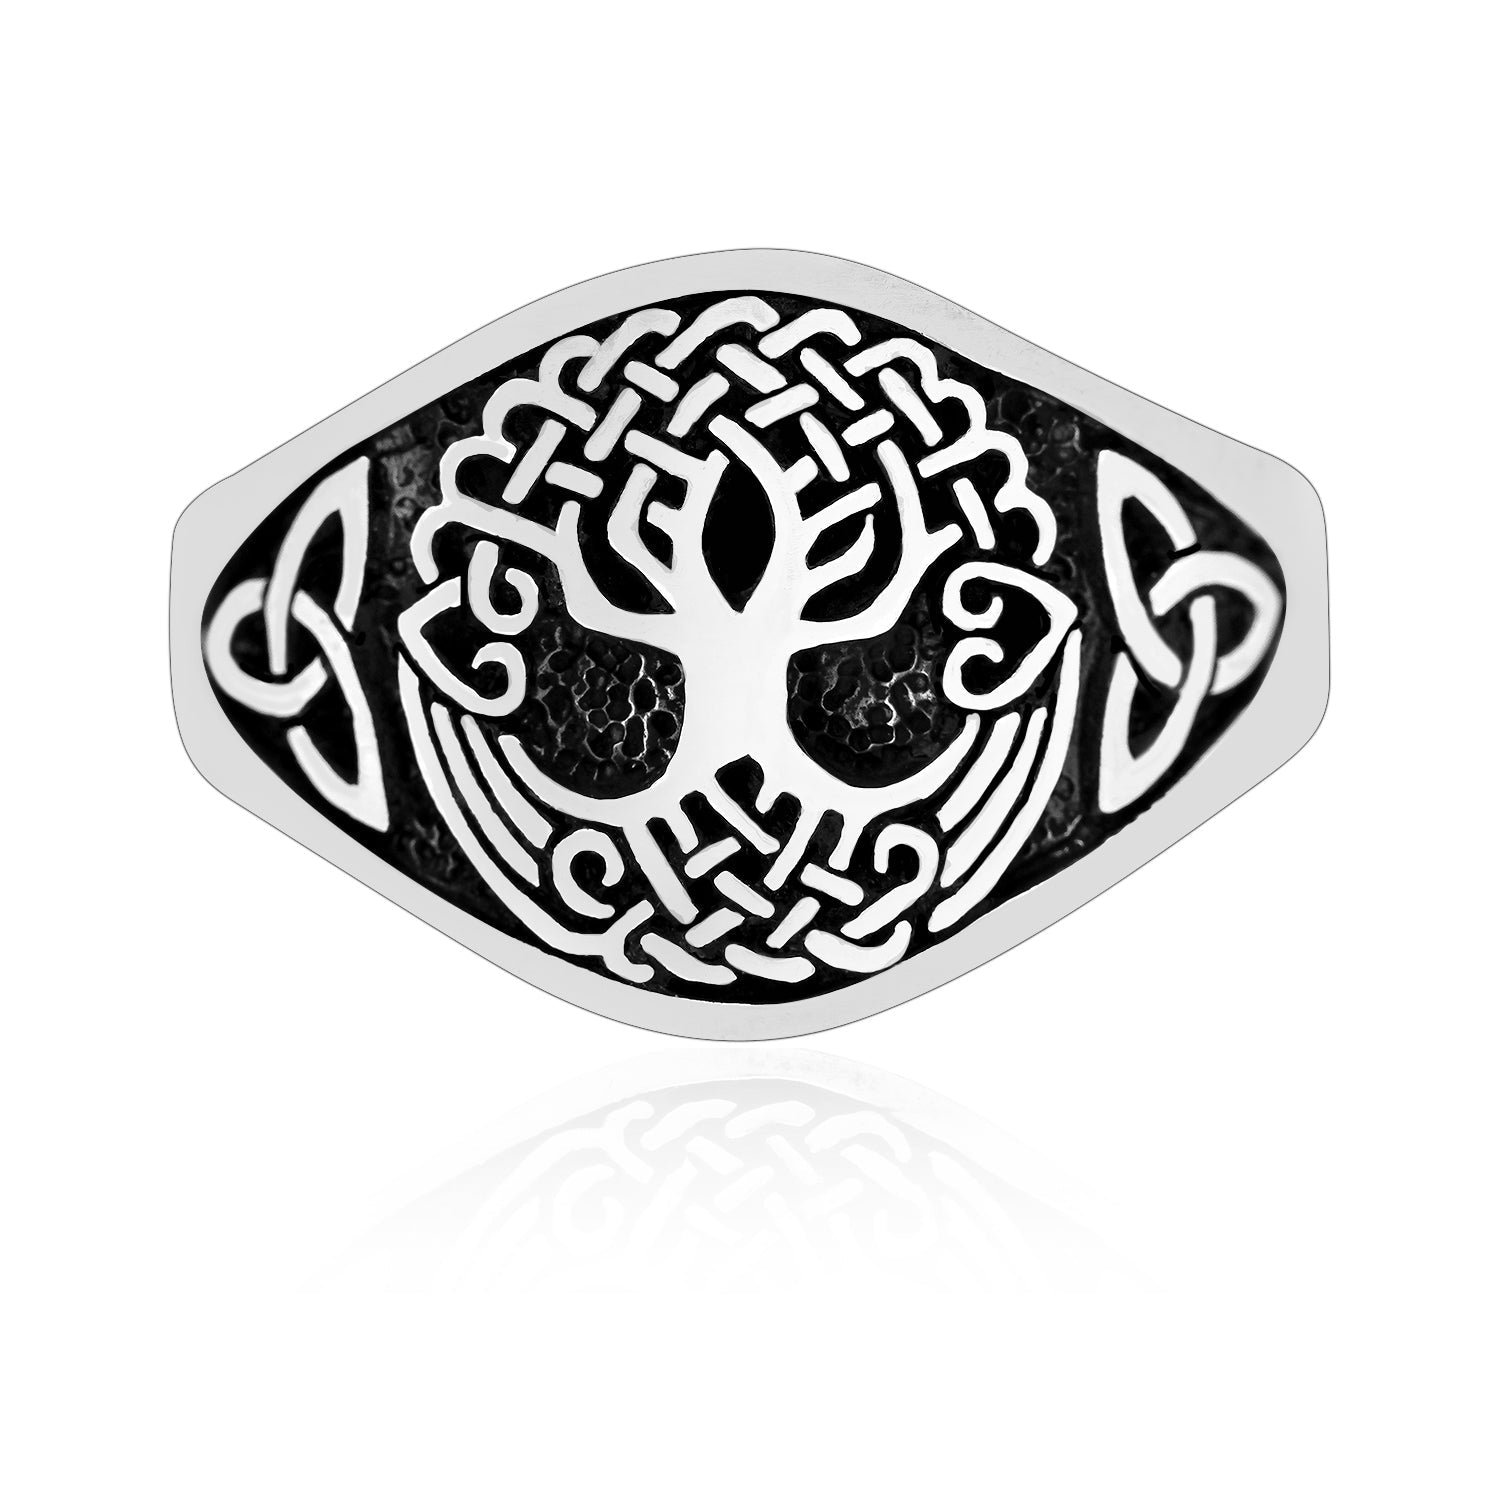 925 Sterling Silver Yggdrasil with Triquetra Pagan Ring - Cosmic Serenity Shop